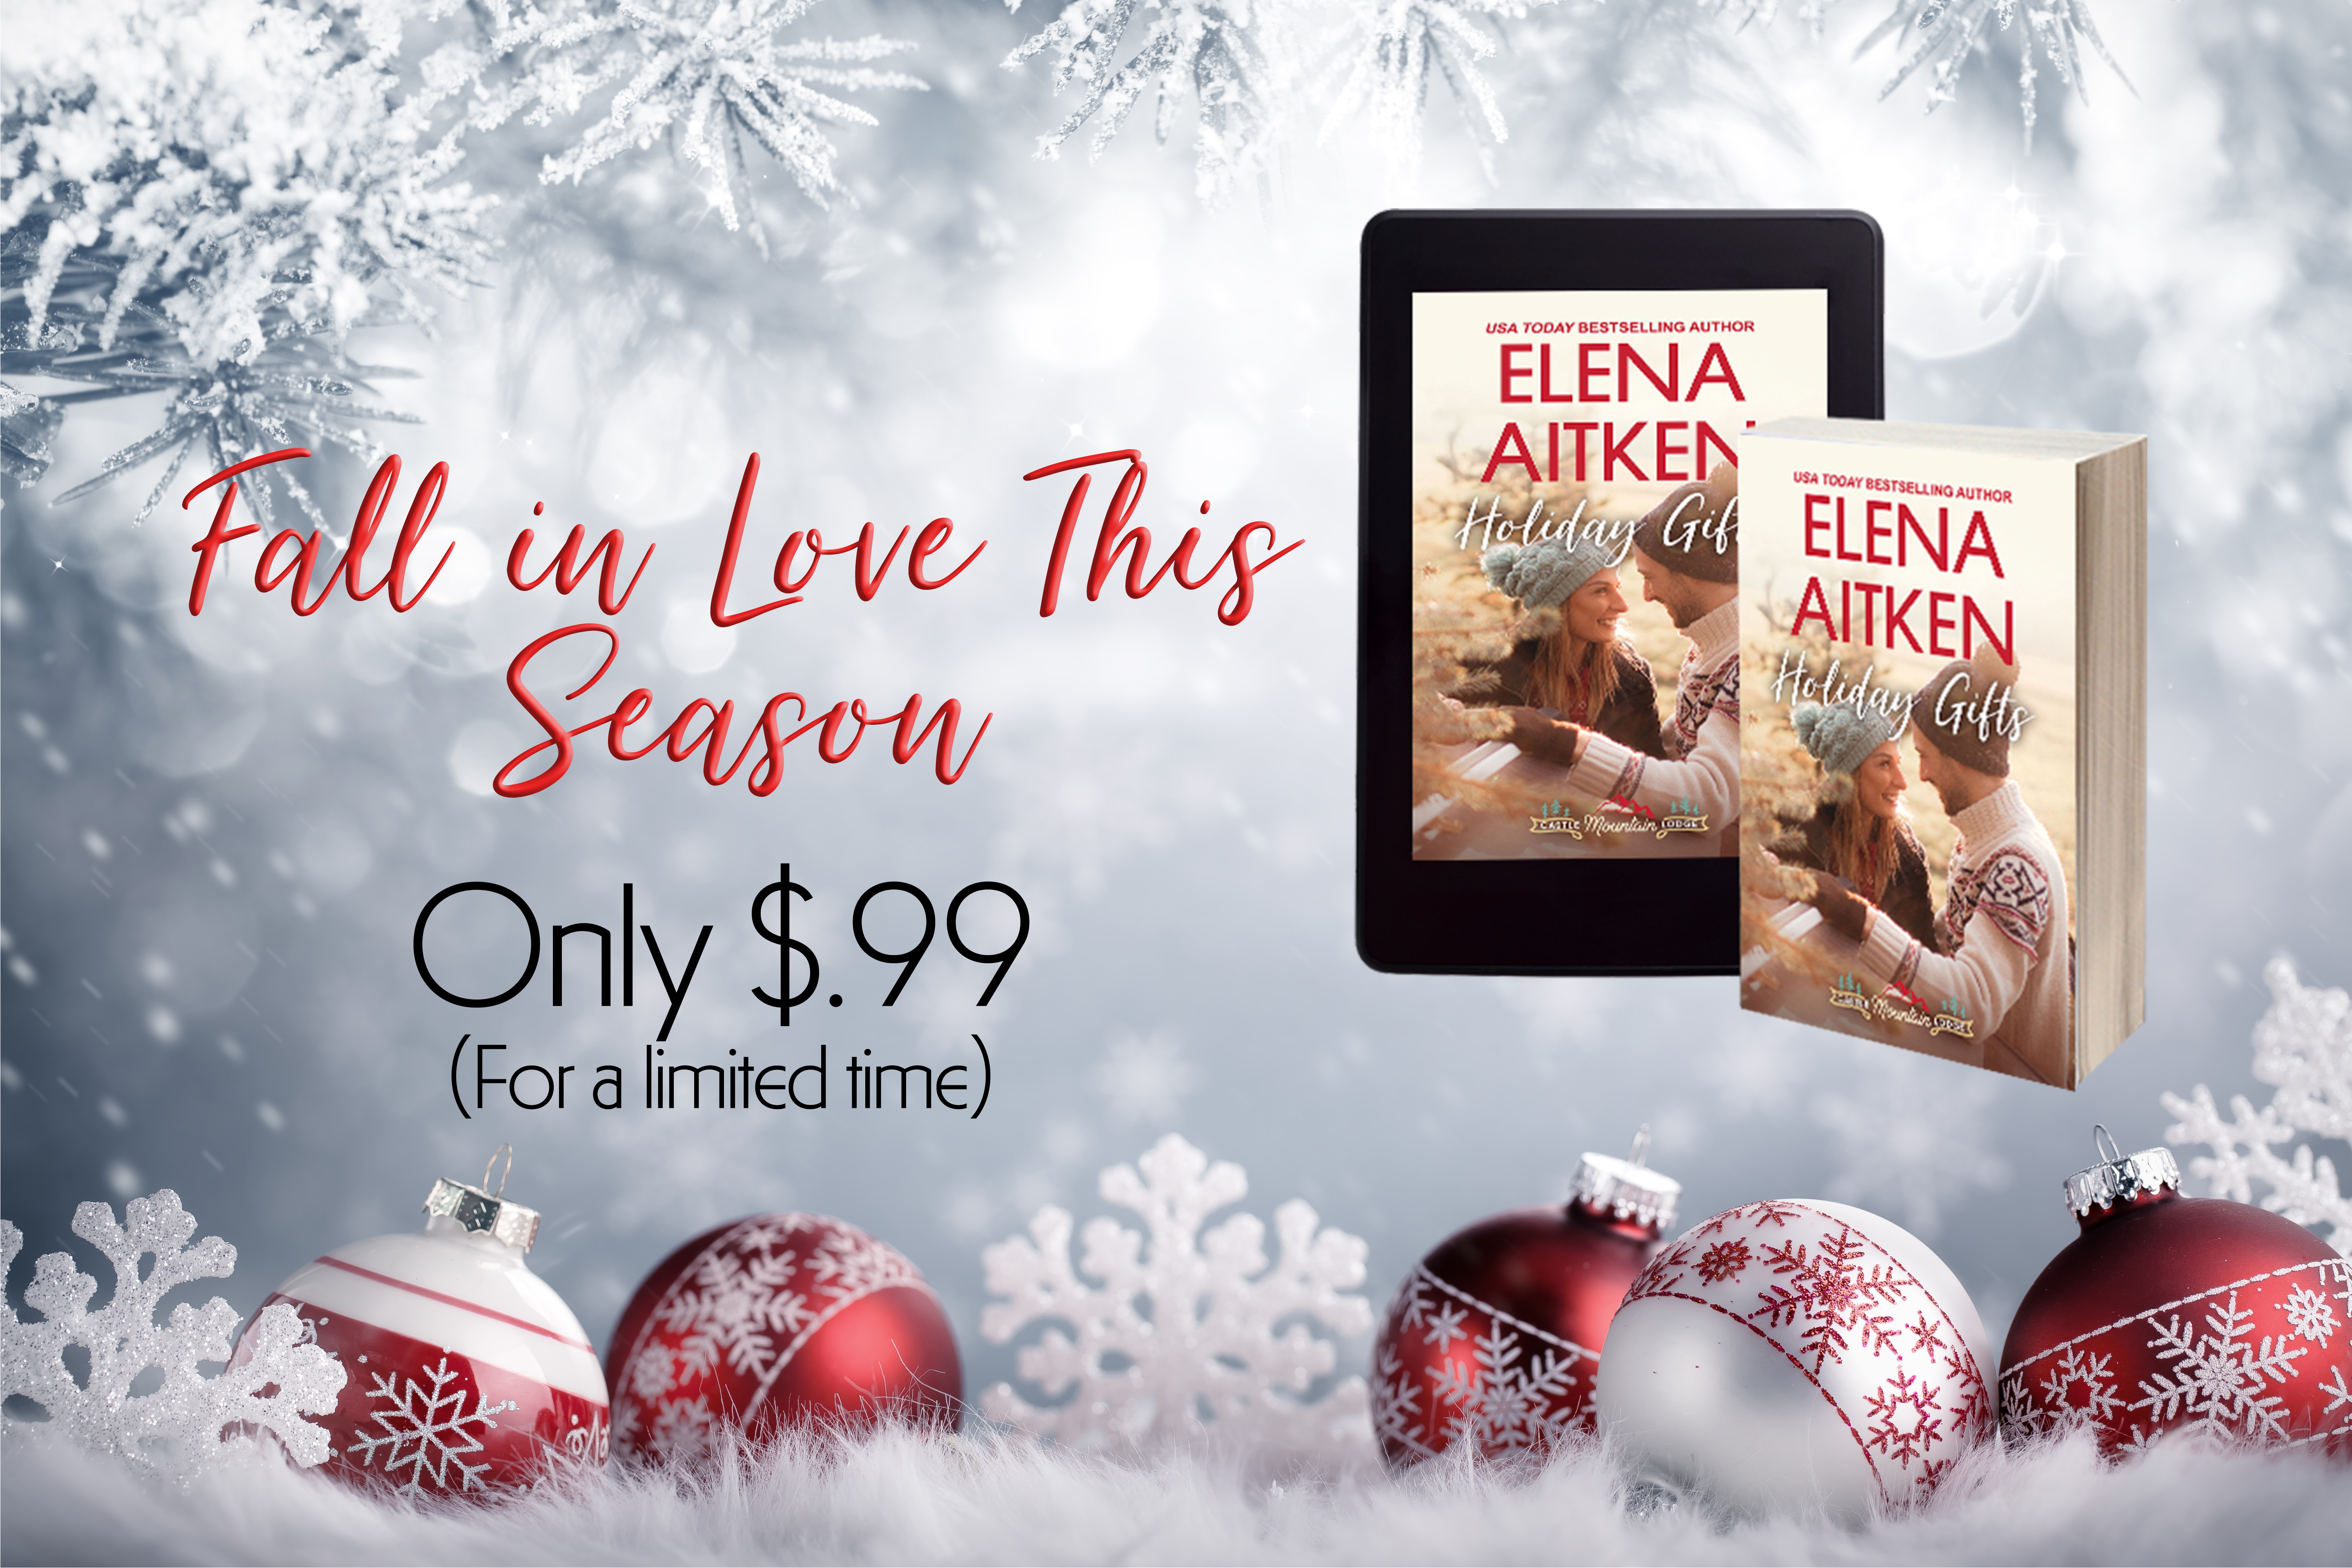 Fall in Love this Christmas…for a limited time!